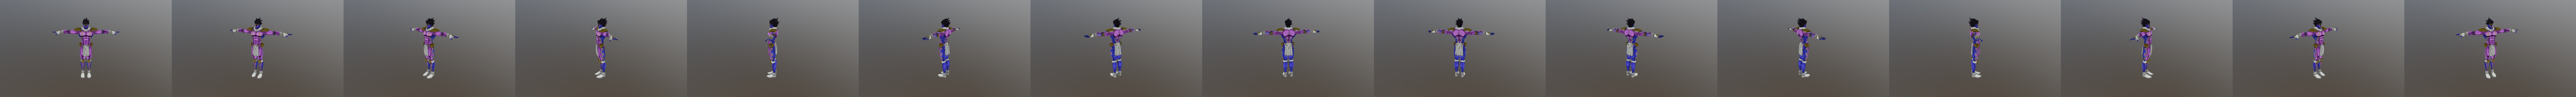 Star Platinum Download Free 3d Model By Adamryandavis007 Adamryandavis007 0f65747 - star platinum roblox script